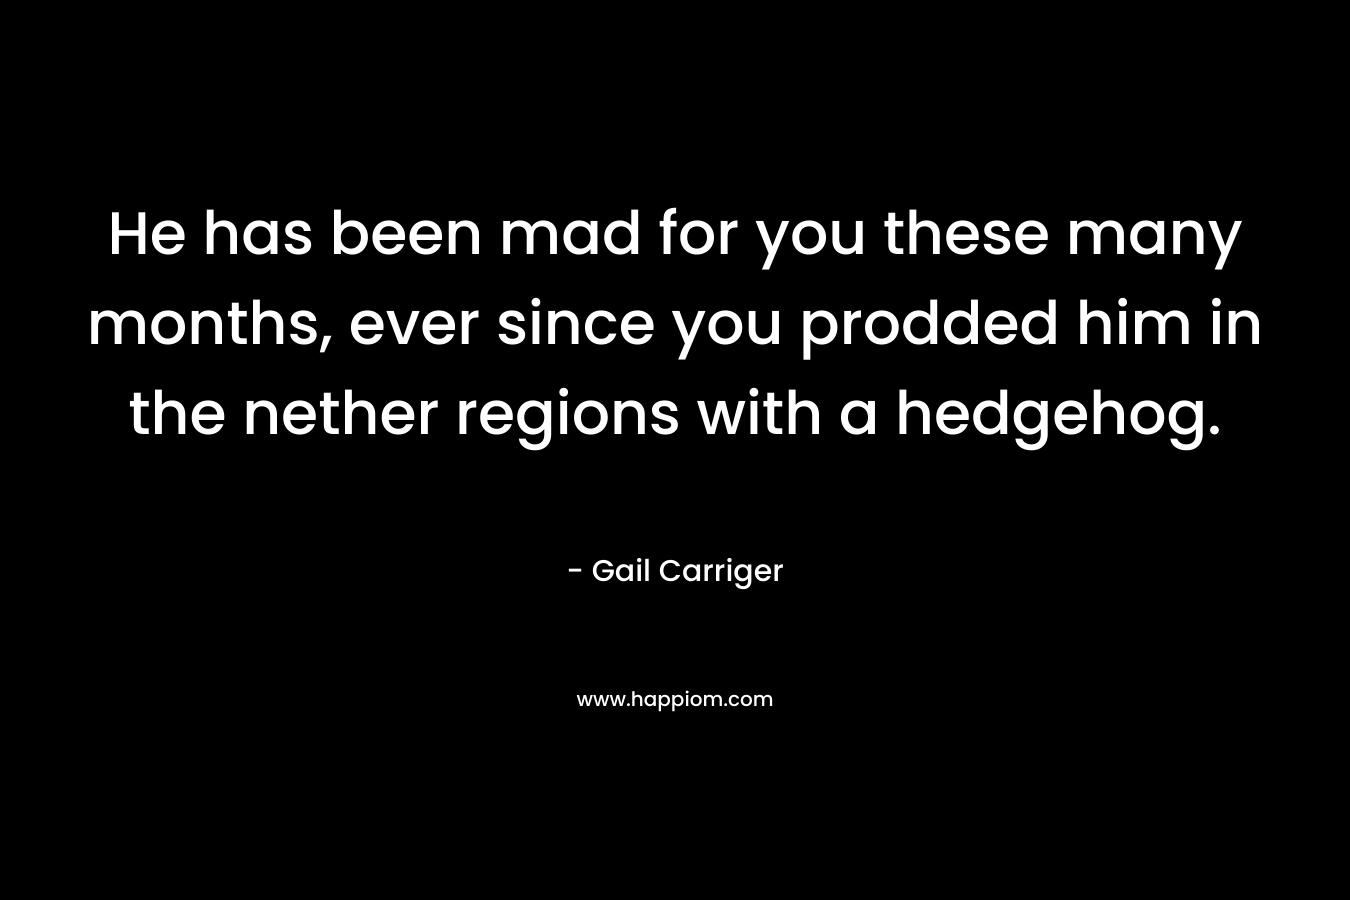 He has been mad for you these many months, ever since you prodded him in the nether regions with a hedgehog. – Gail Carriger